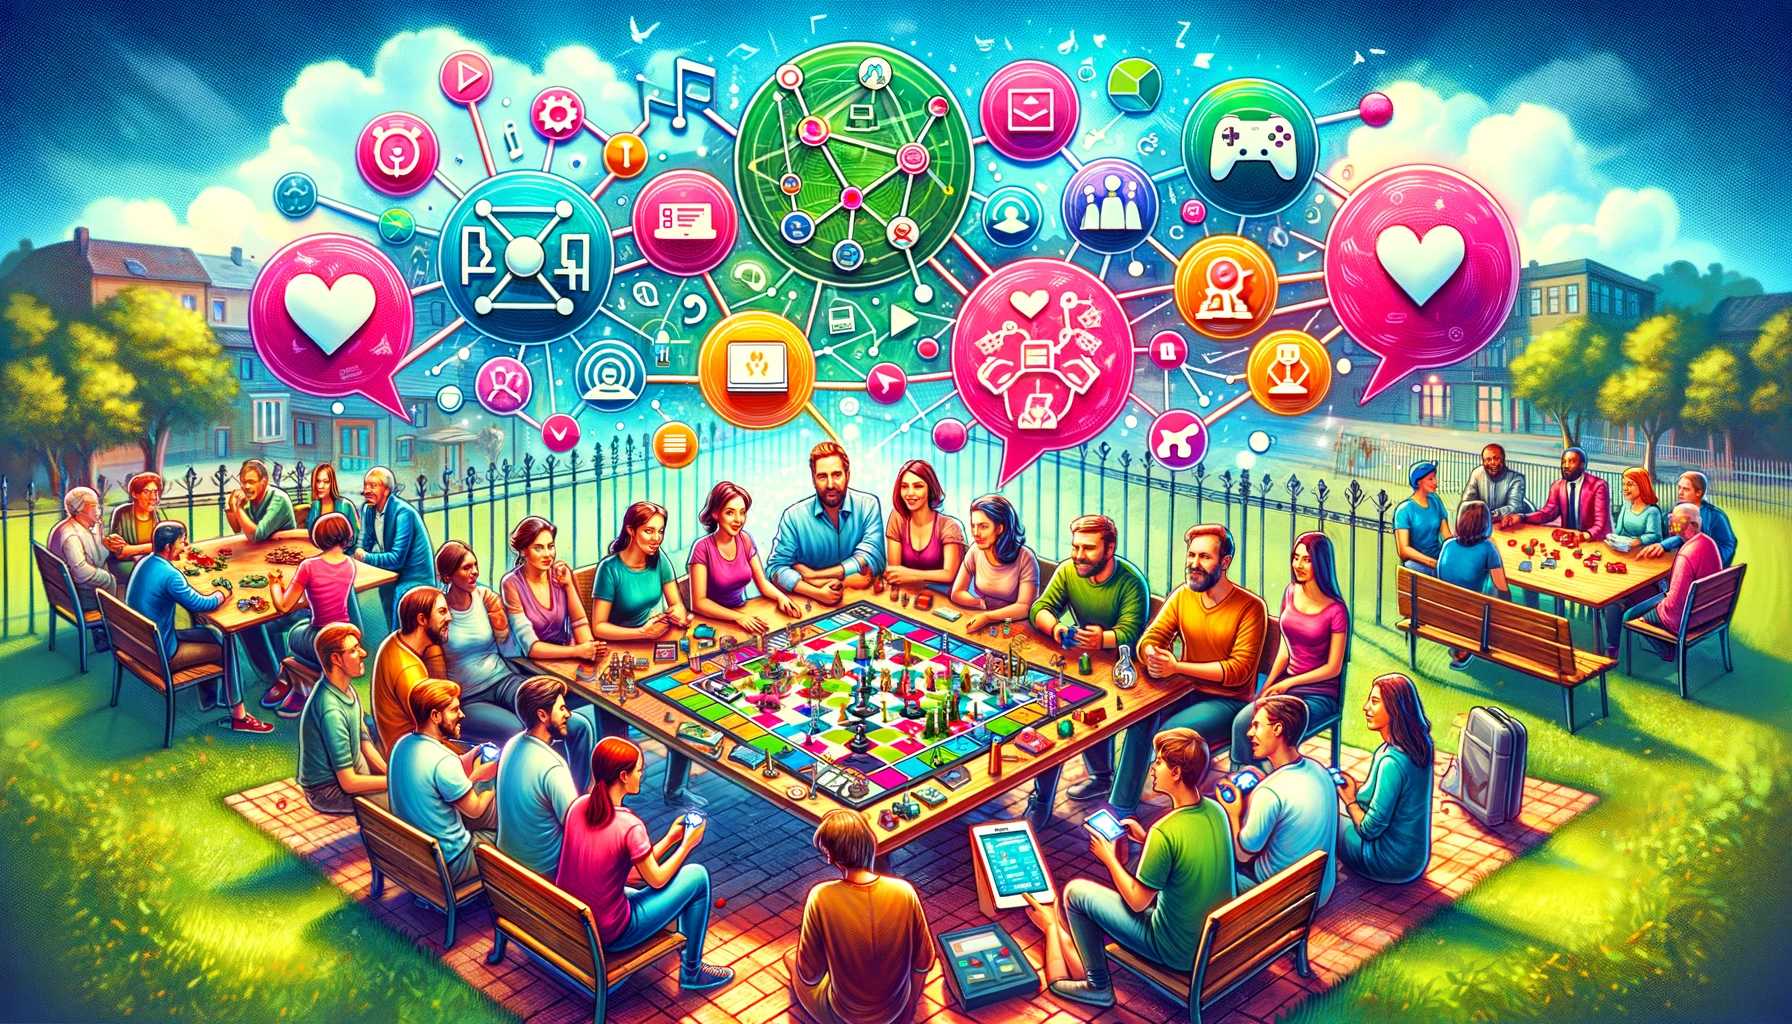 THE IMPACT OF GAMES ON SOCIAL INTERACTIONS